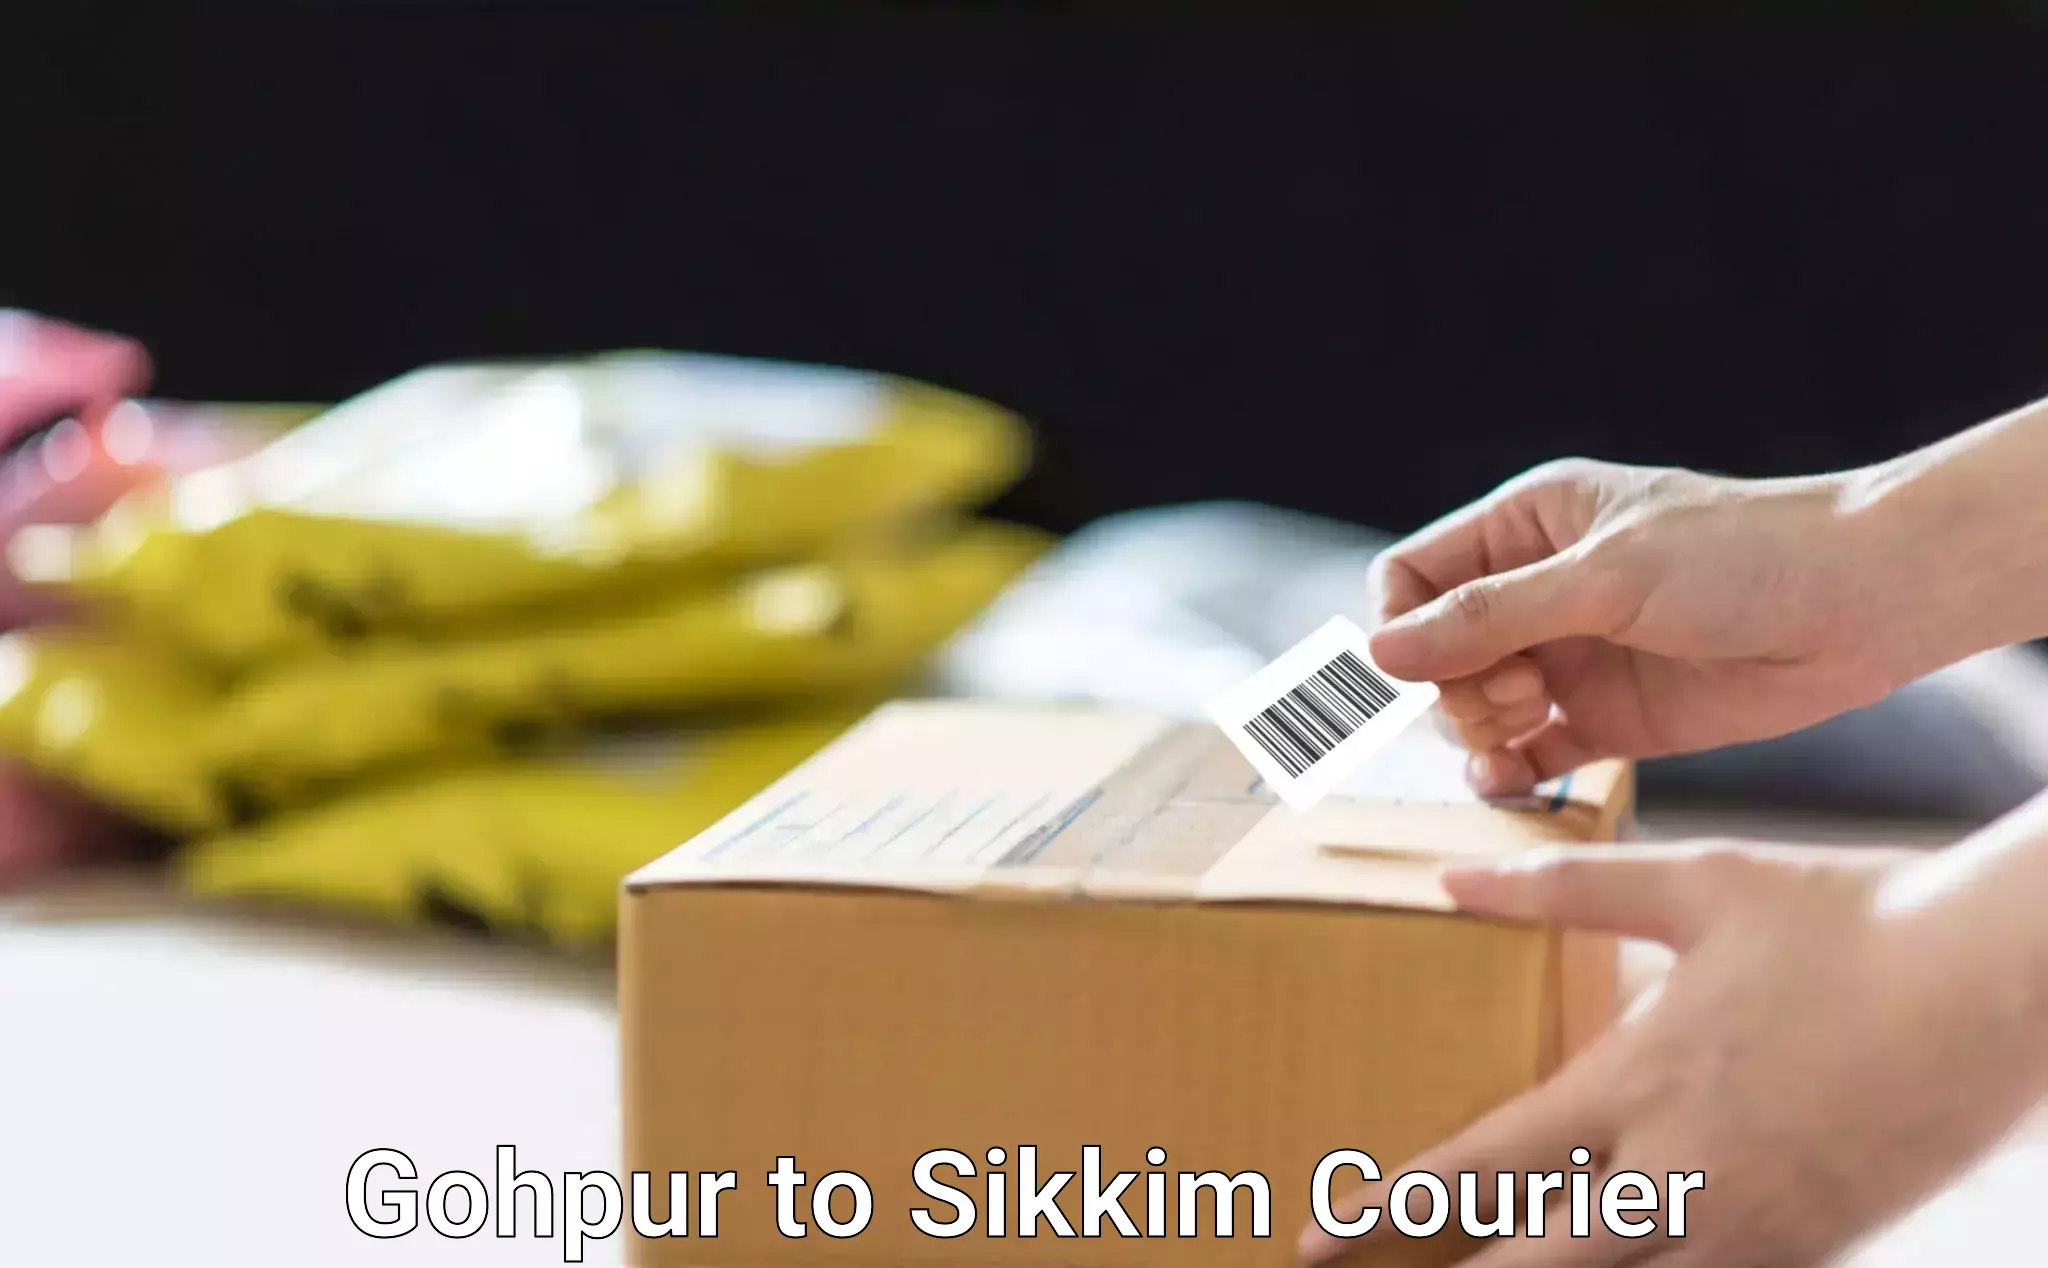 Seamless shipping experience Gohpur to Sikkim